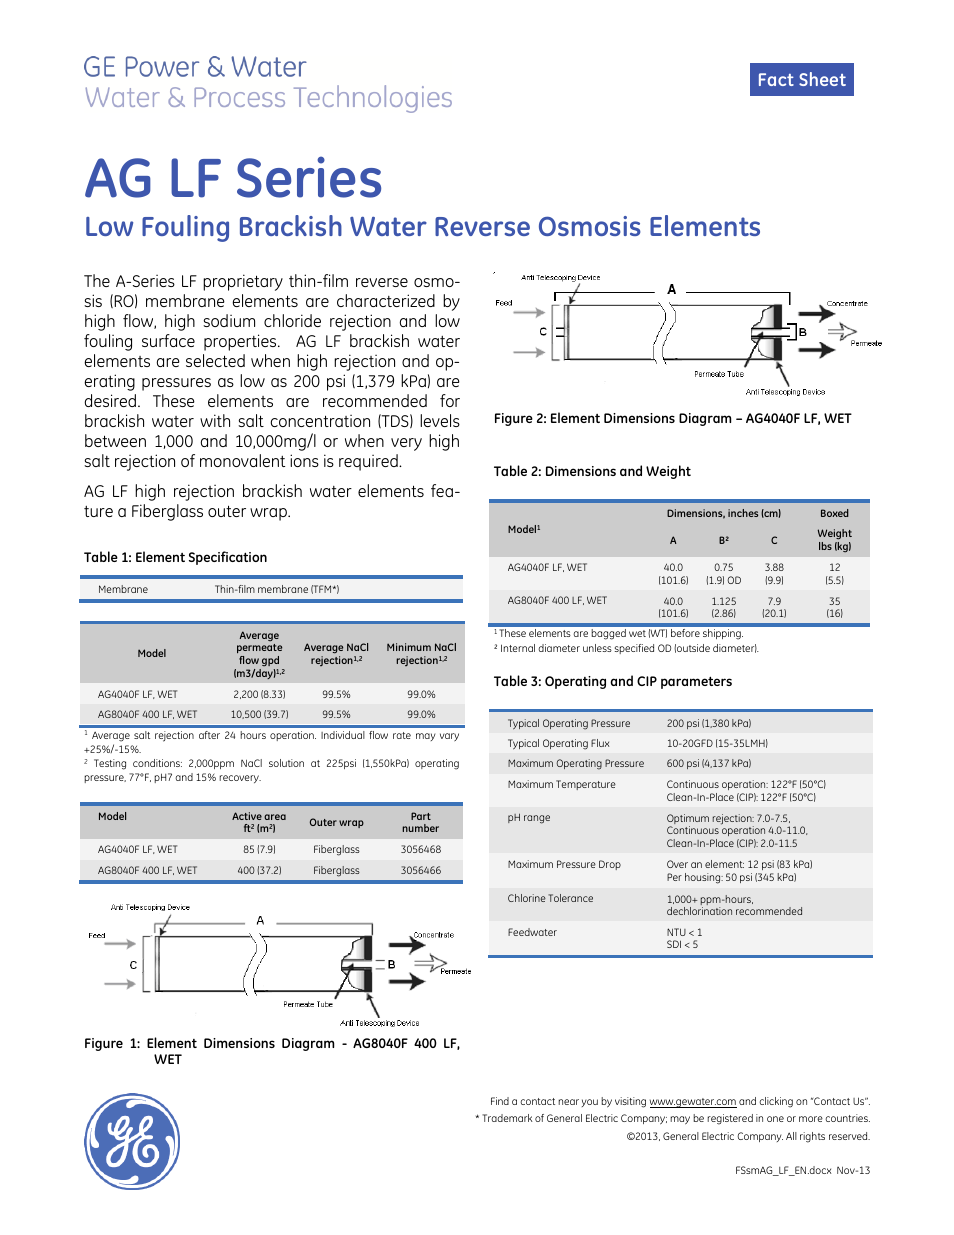 Spiral Wound Membranes - AG LF Series